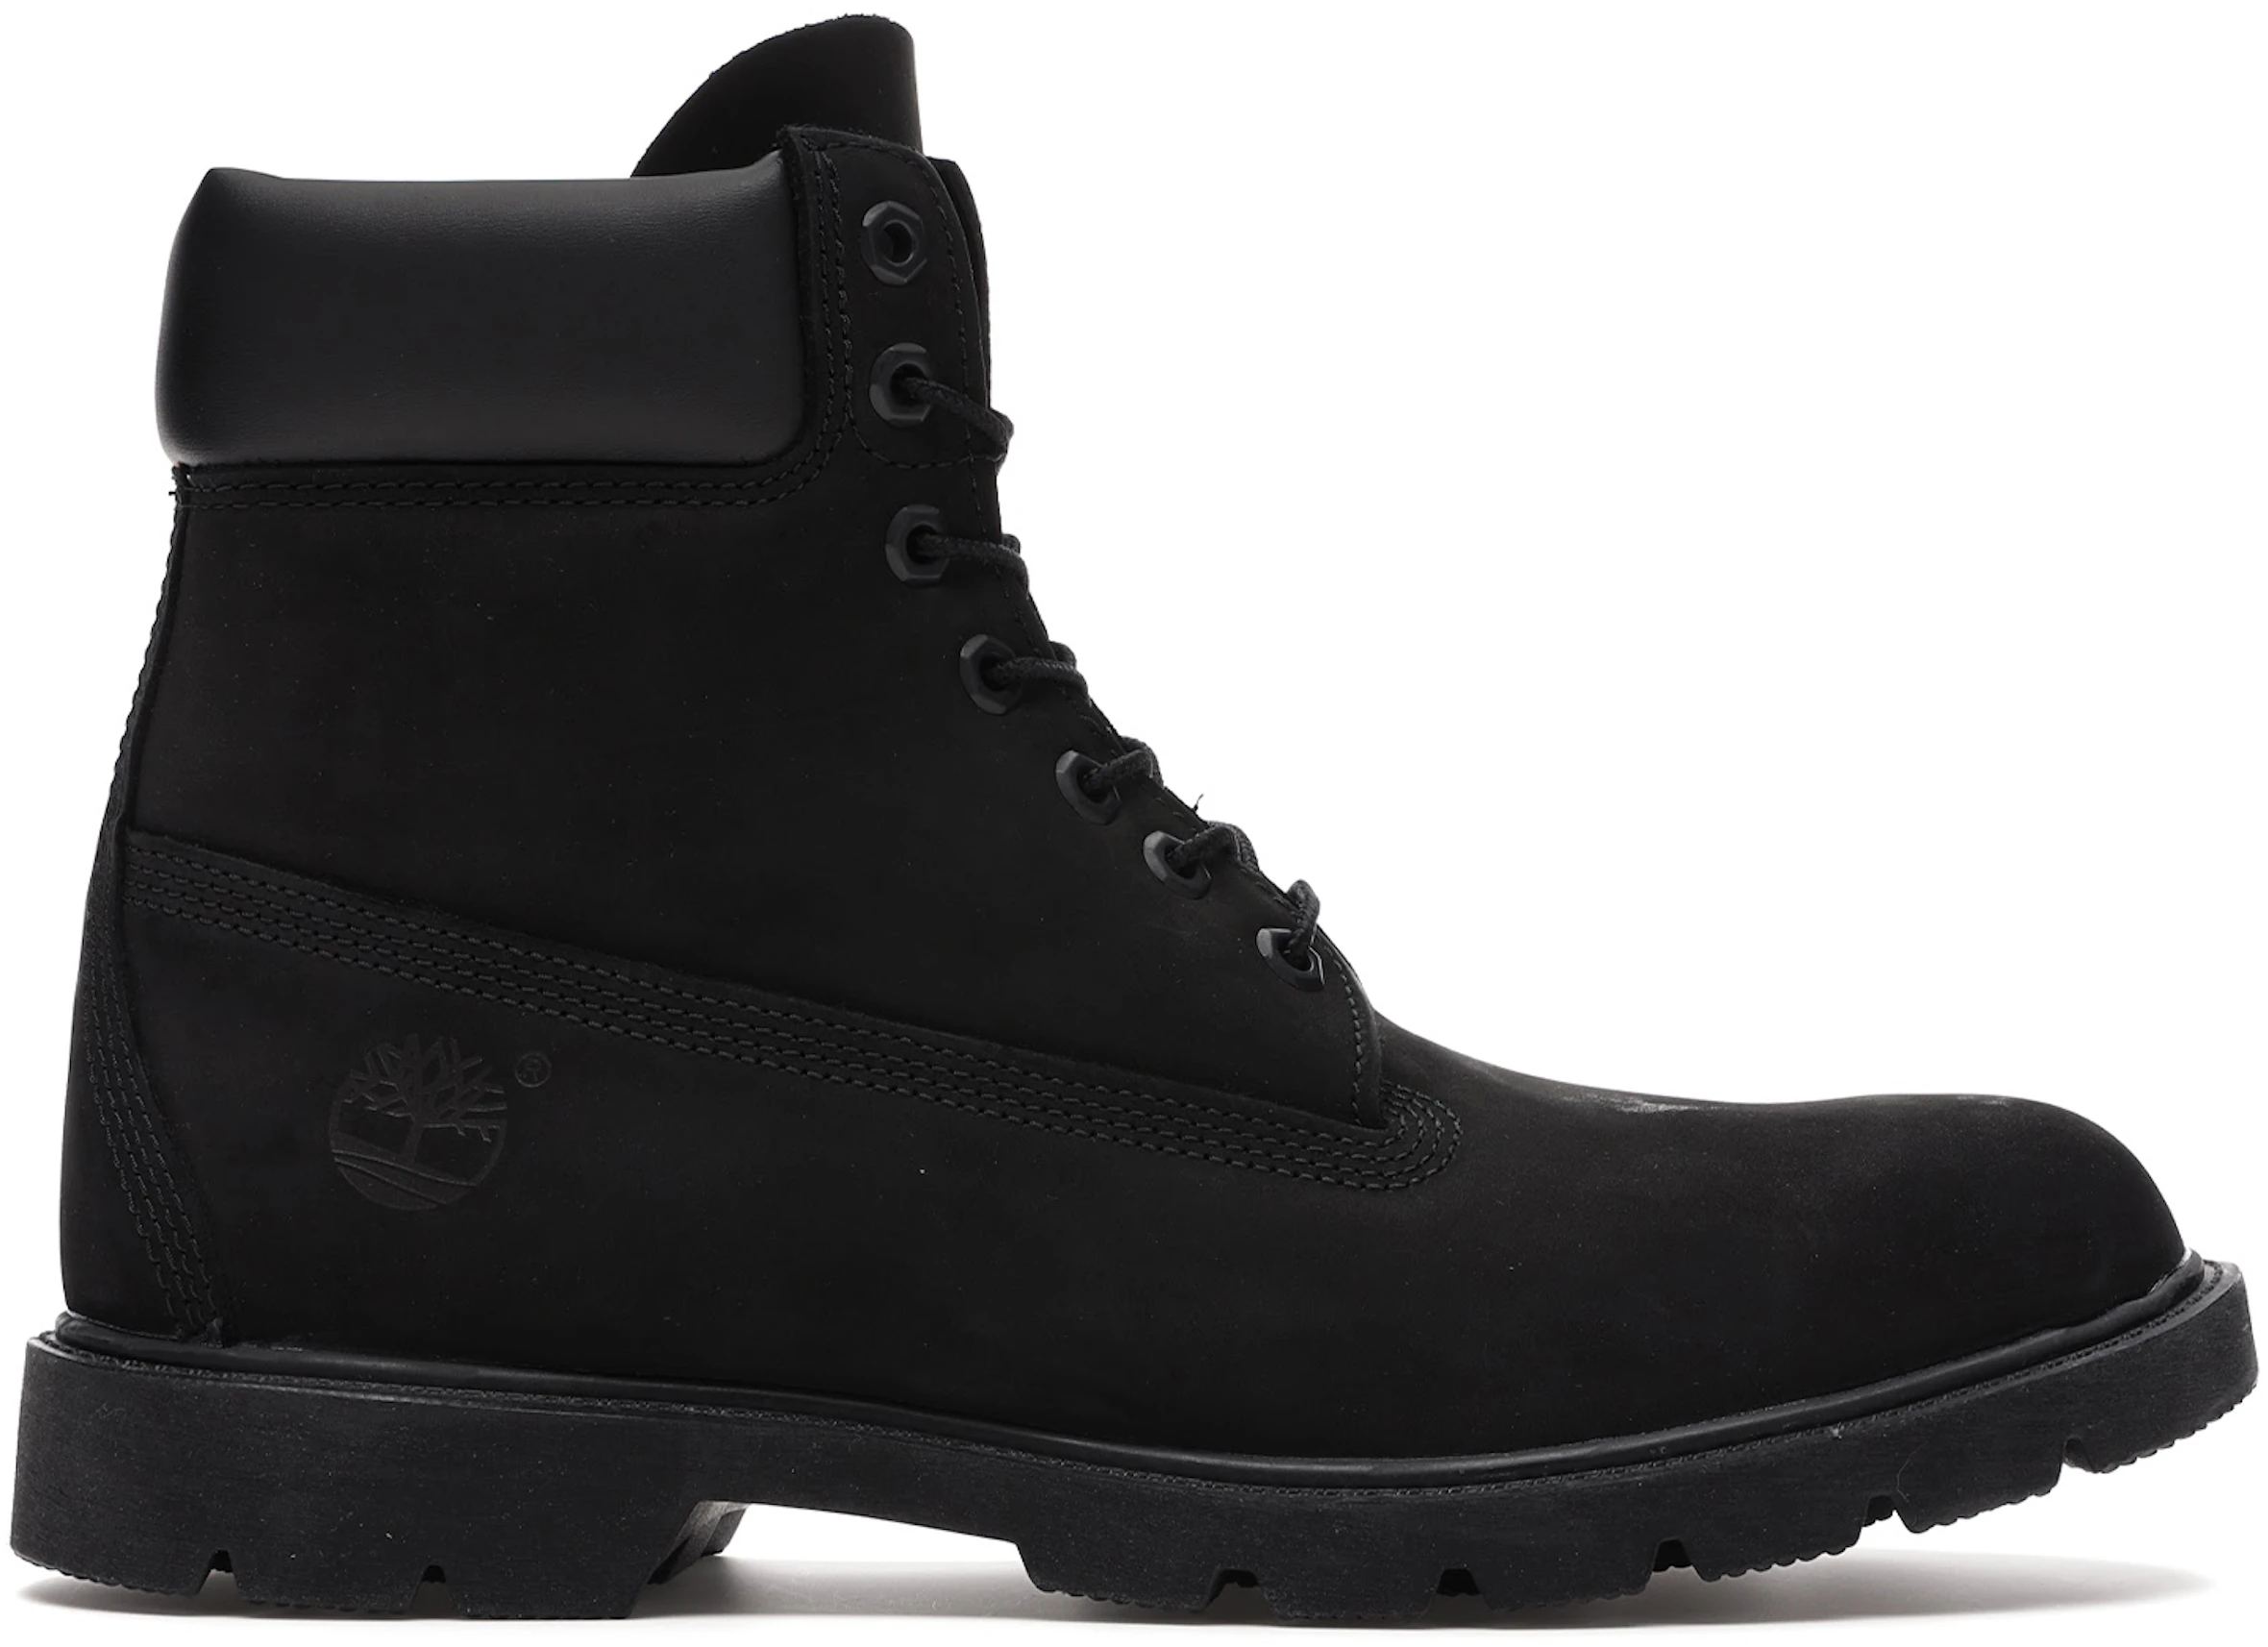 nep Ongemak wees stil Buy Timberland Boots Shoes & New Sneakers - StockX